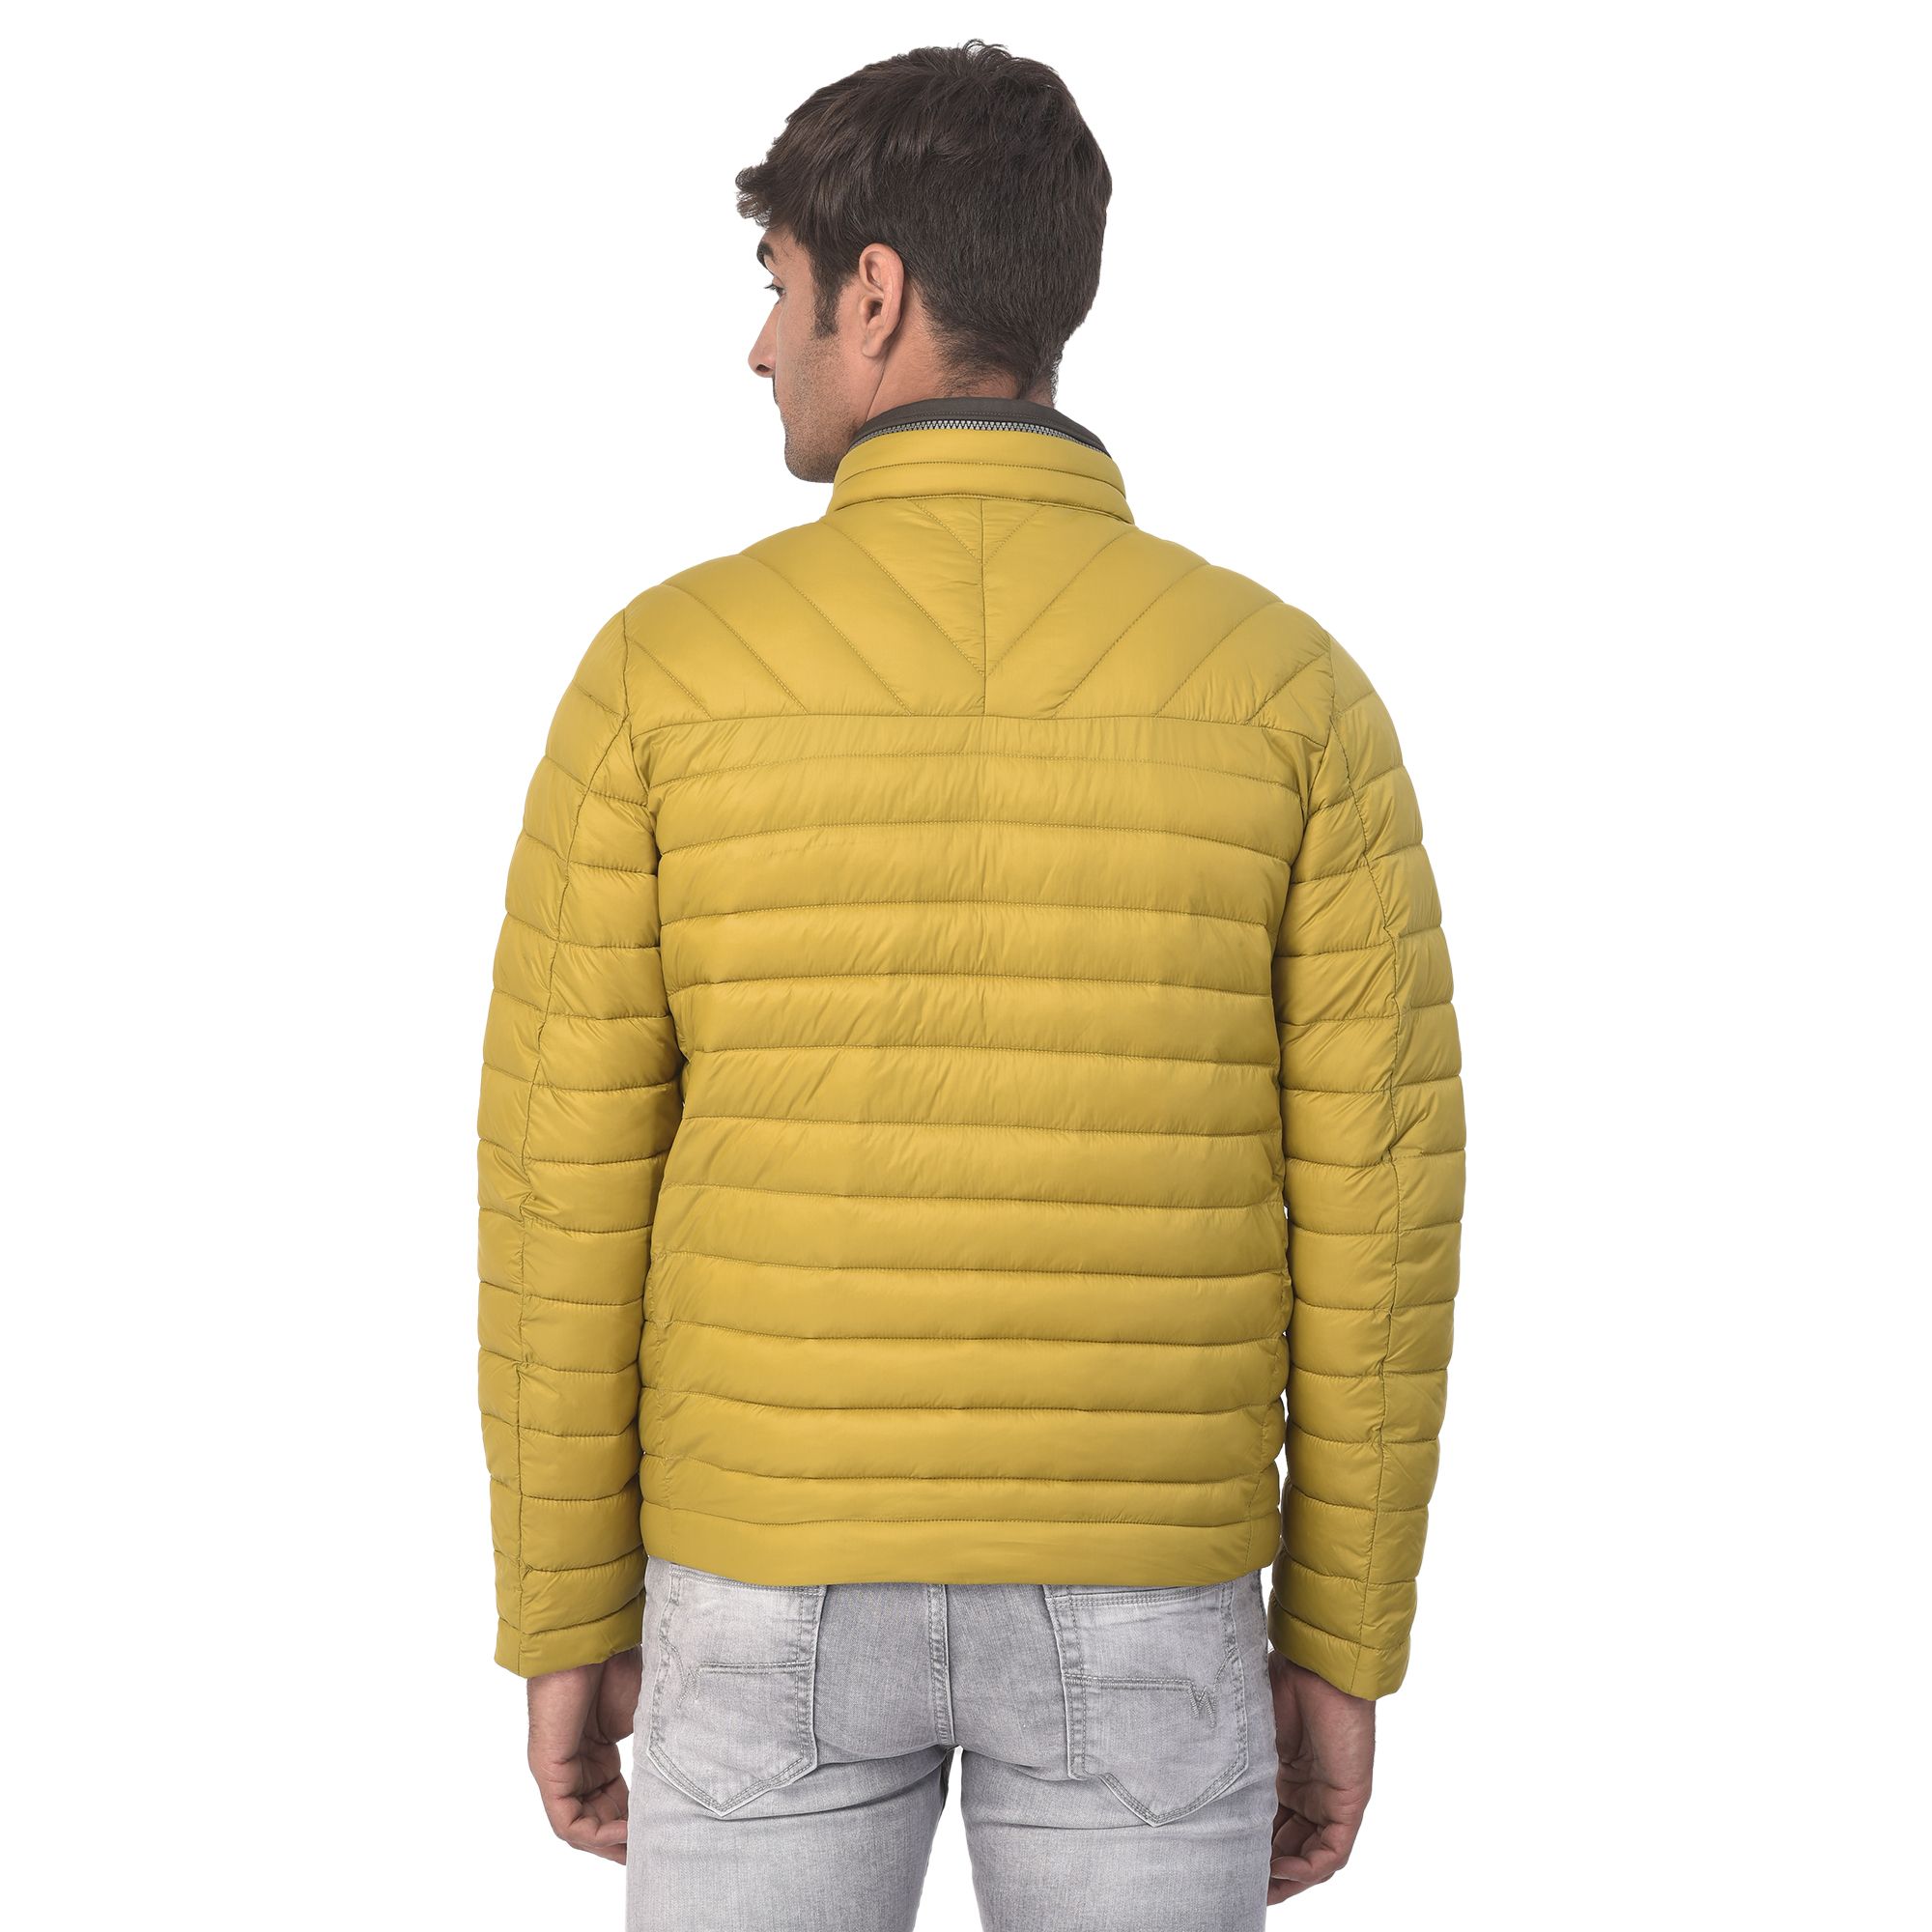 Golden palm quilted jacket